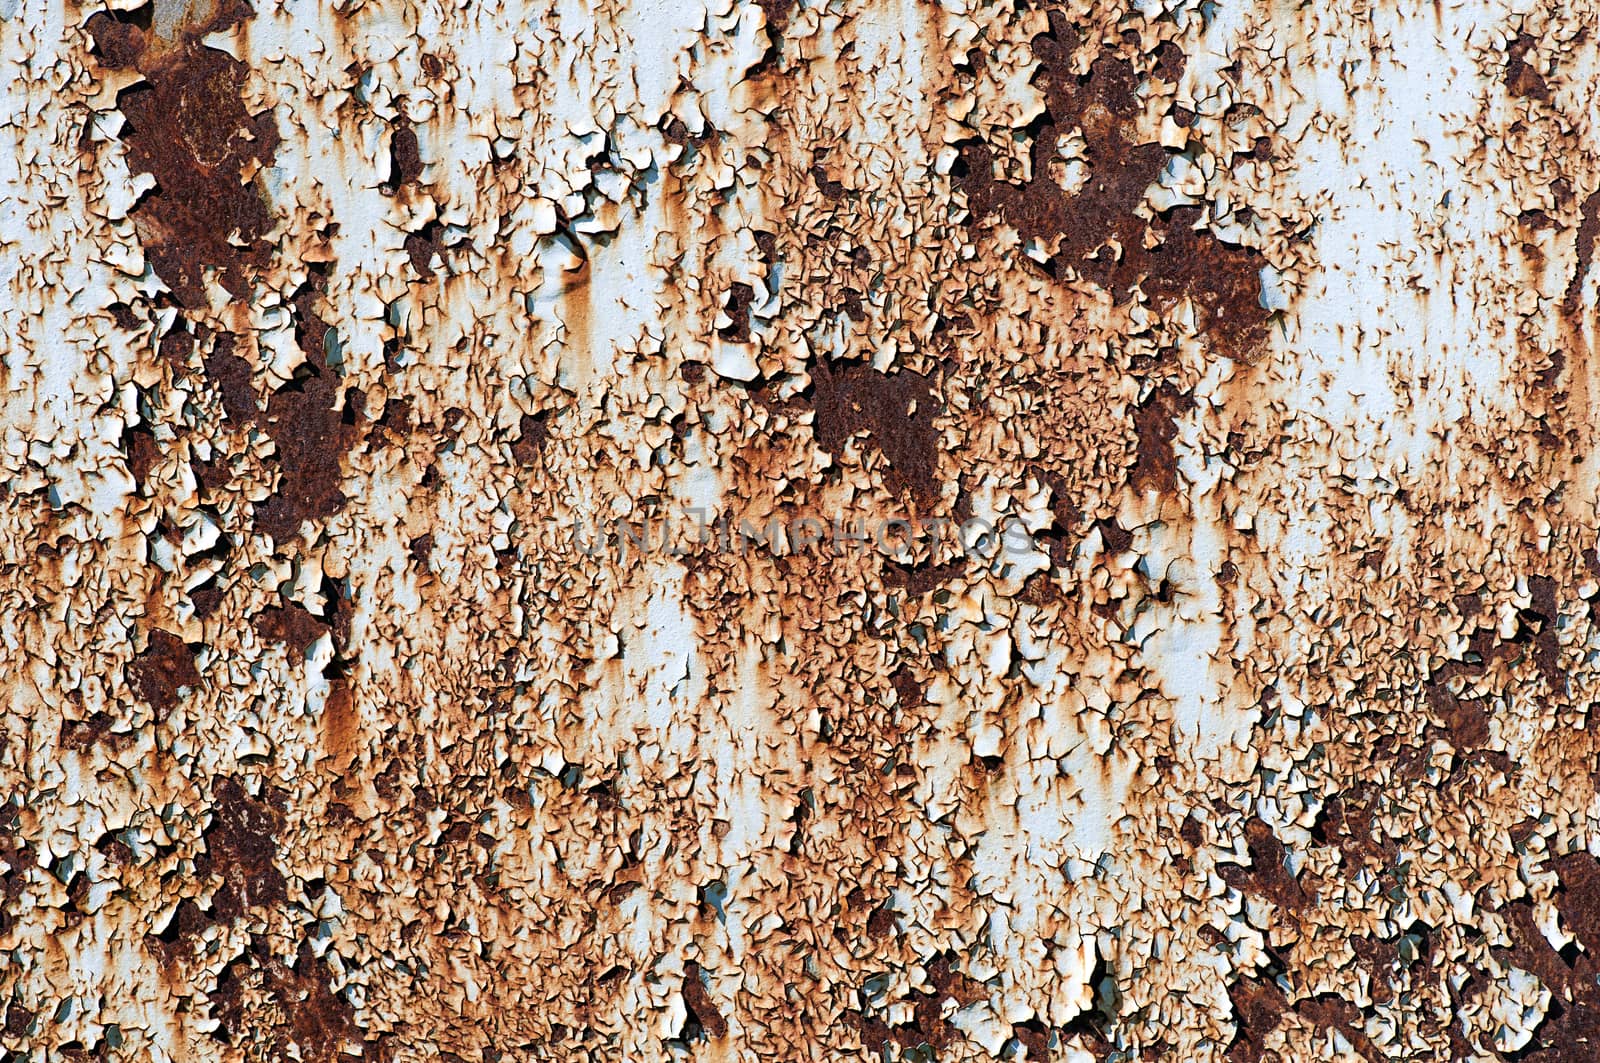 Rusted metallic surface with flaky paint